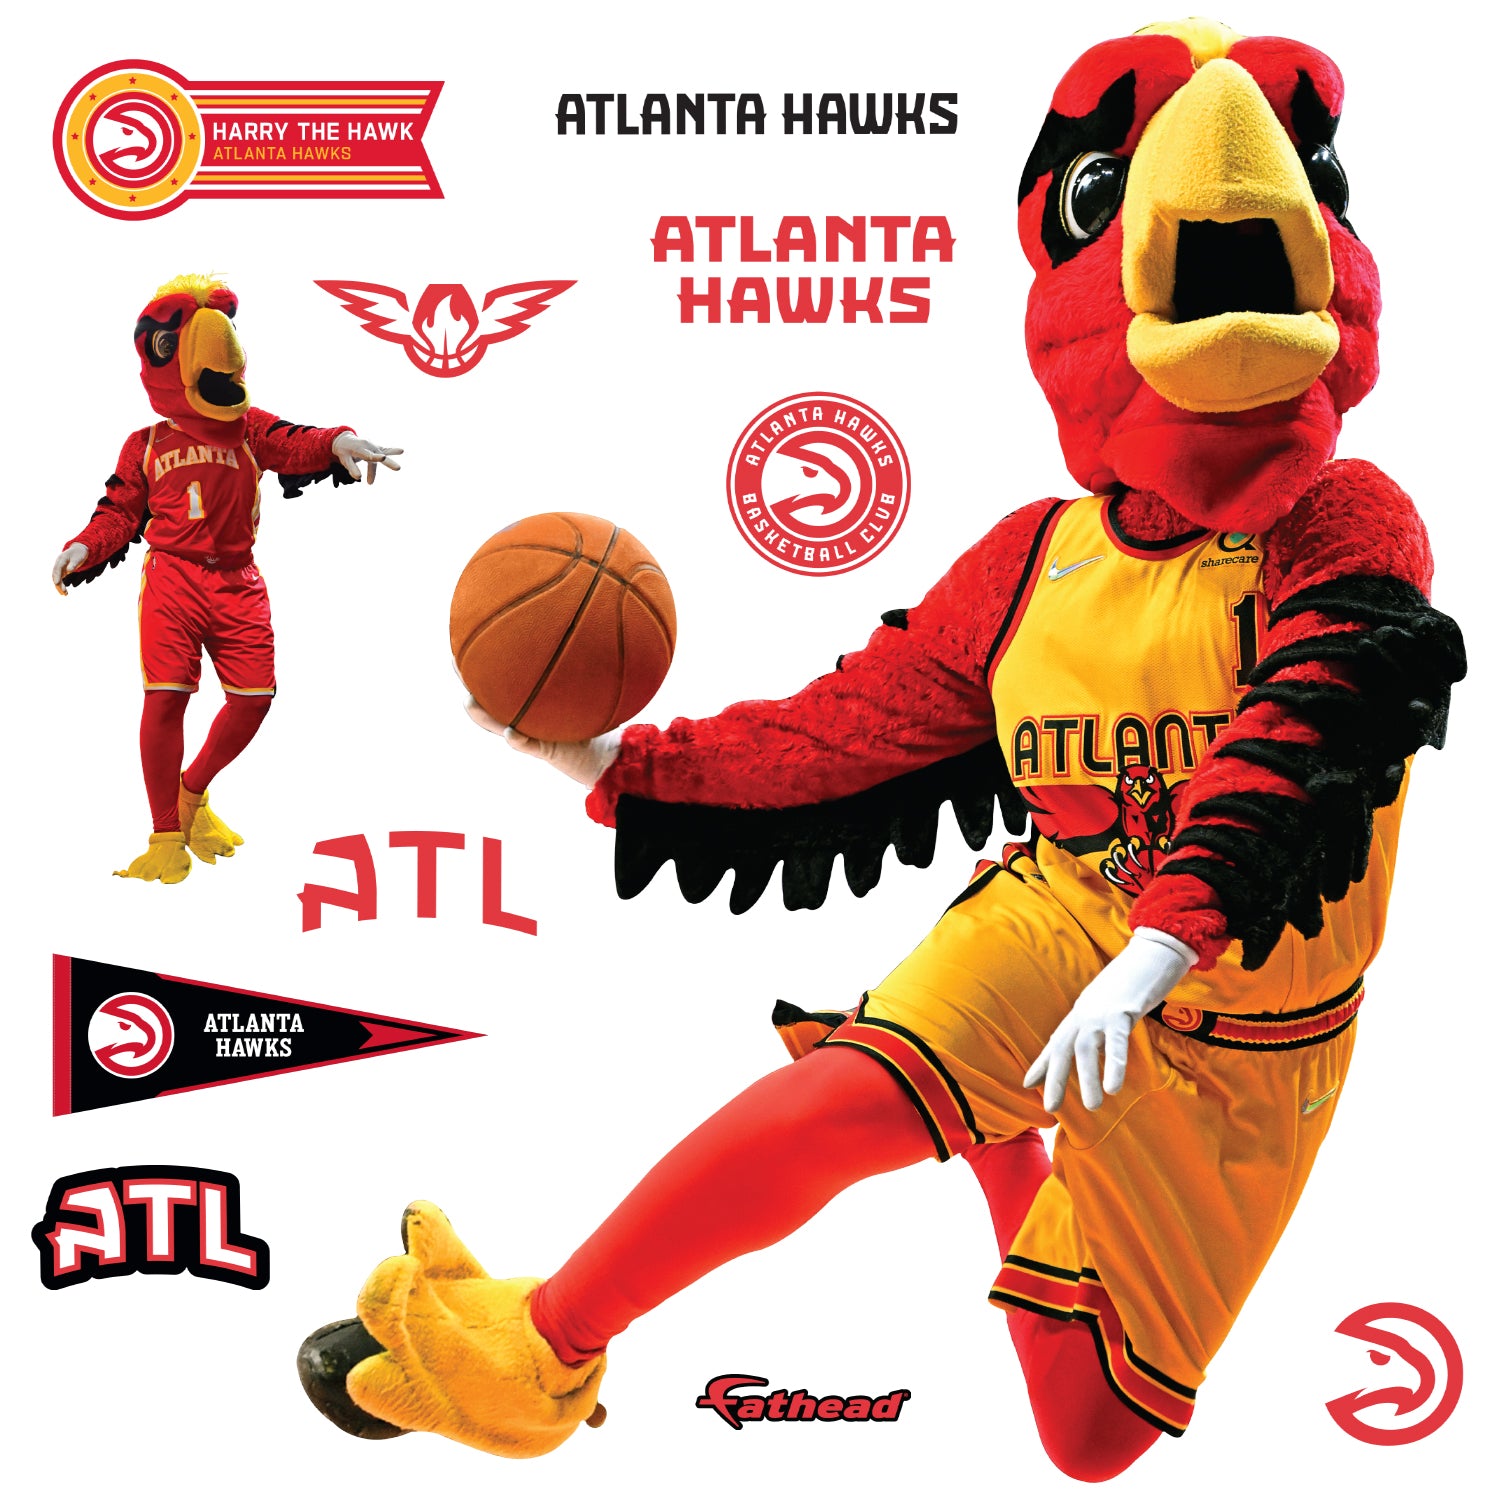 NEWS BRIEF: Harry the Hawk becomes second-highest paid NBA mascot